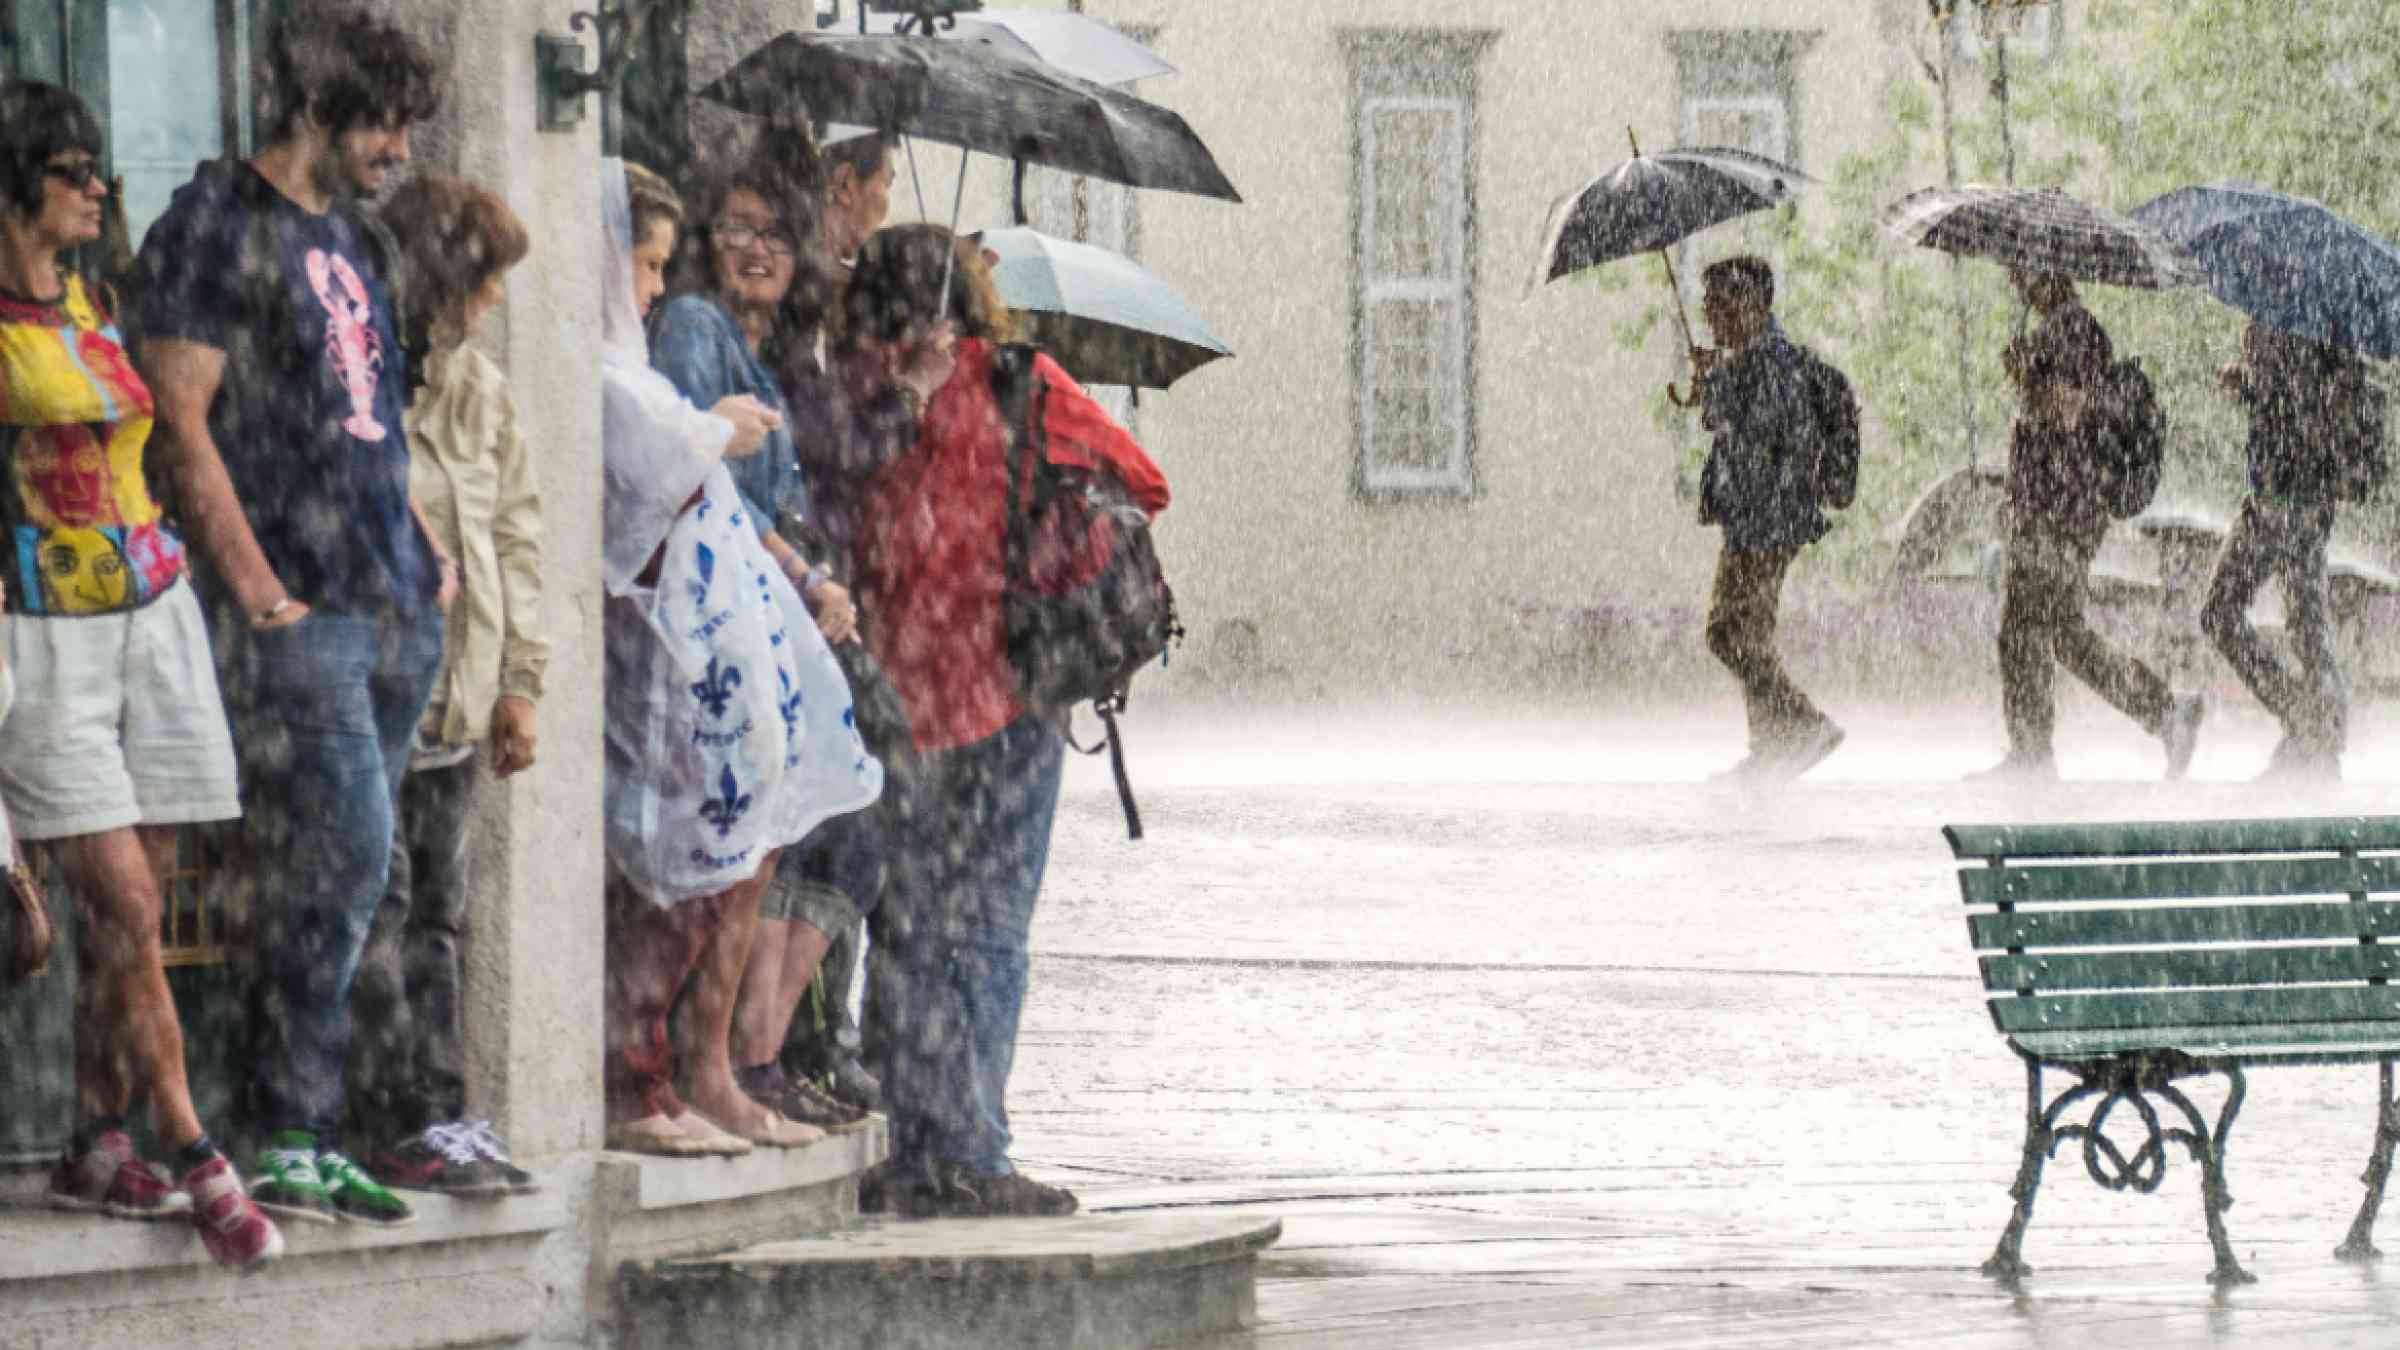 A group of people hide from heavy rain under a building while three persons in the background walk with umbrellas